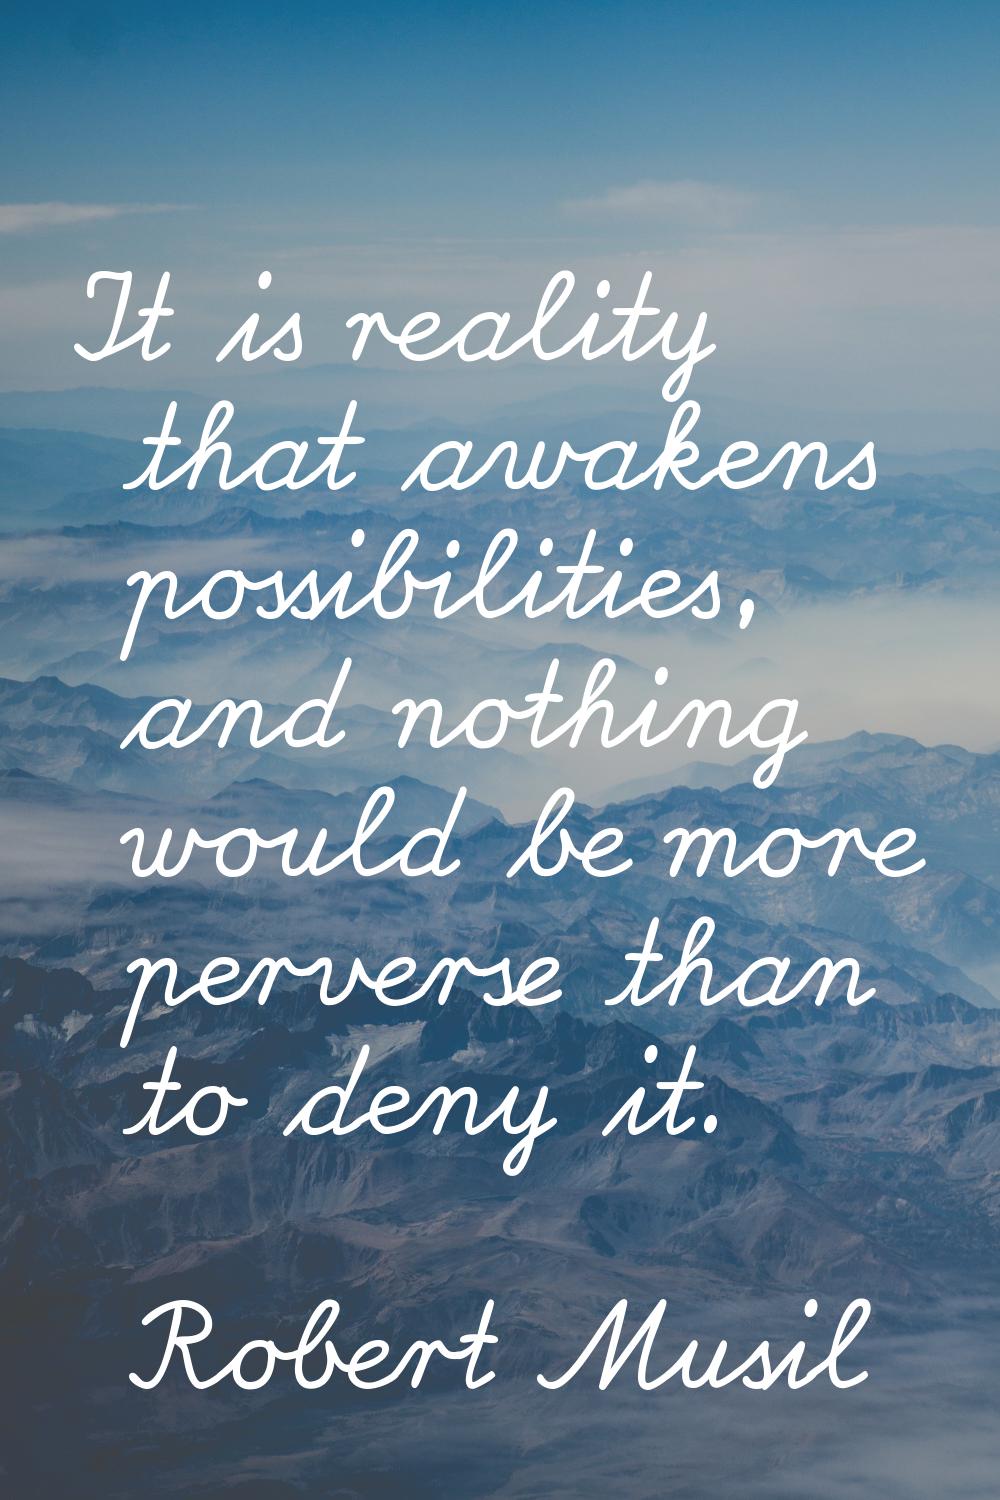 It is reality that awakens possibilities, and nothing would be more perverse than to deny it.